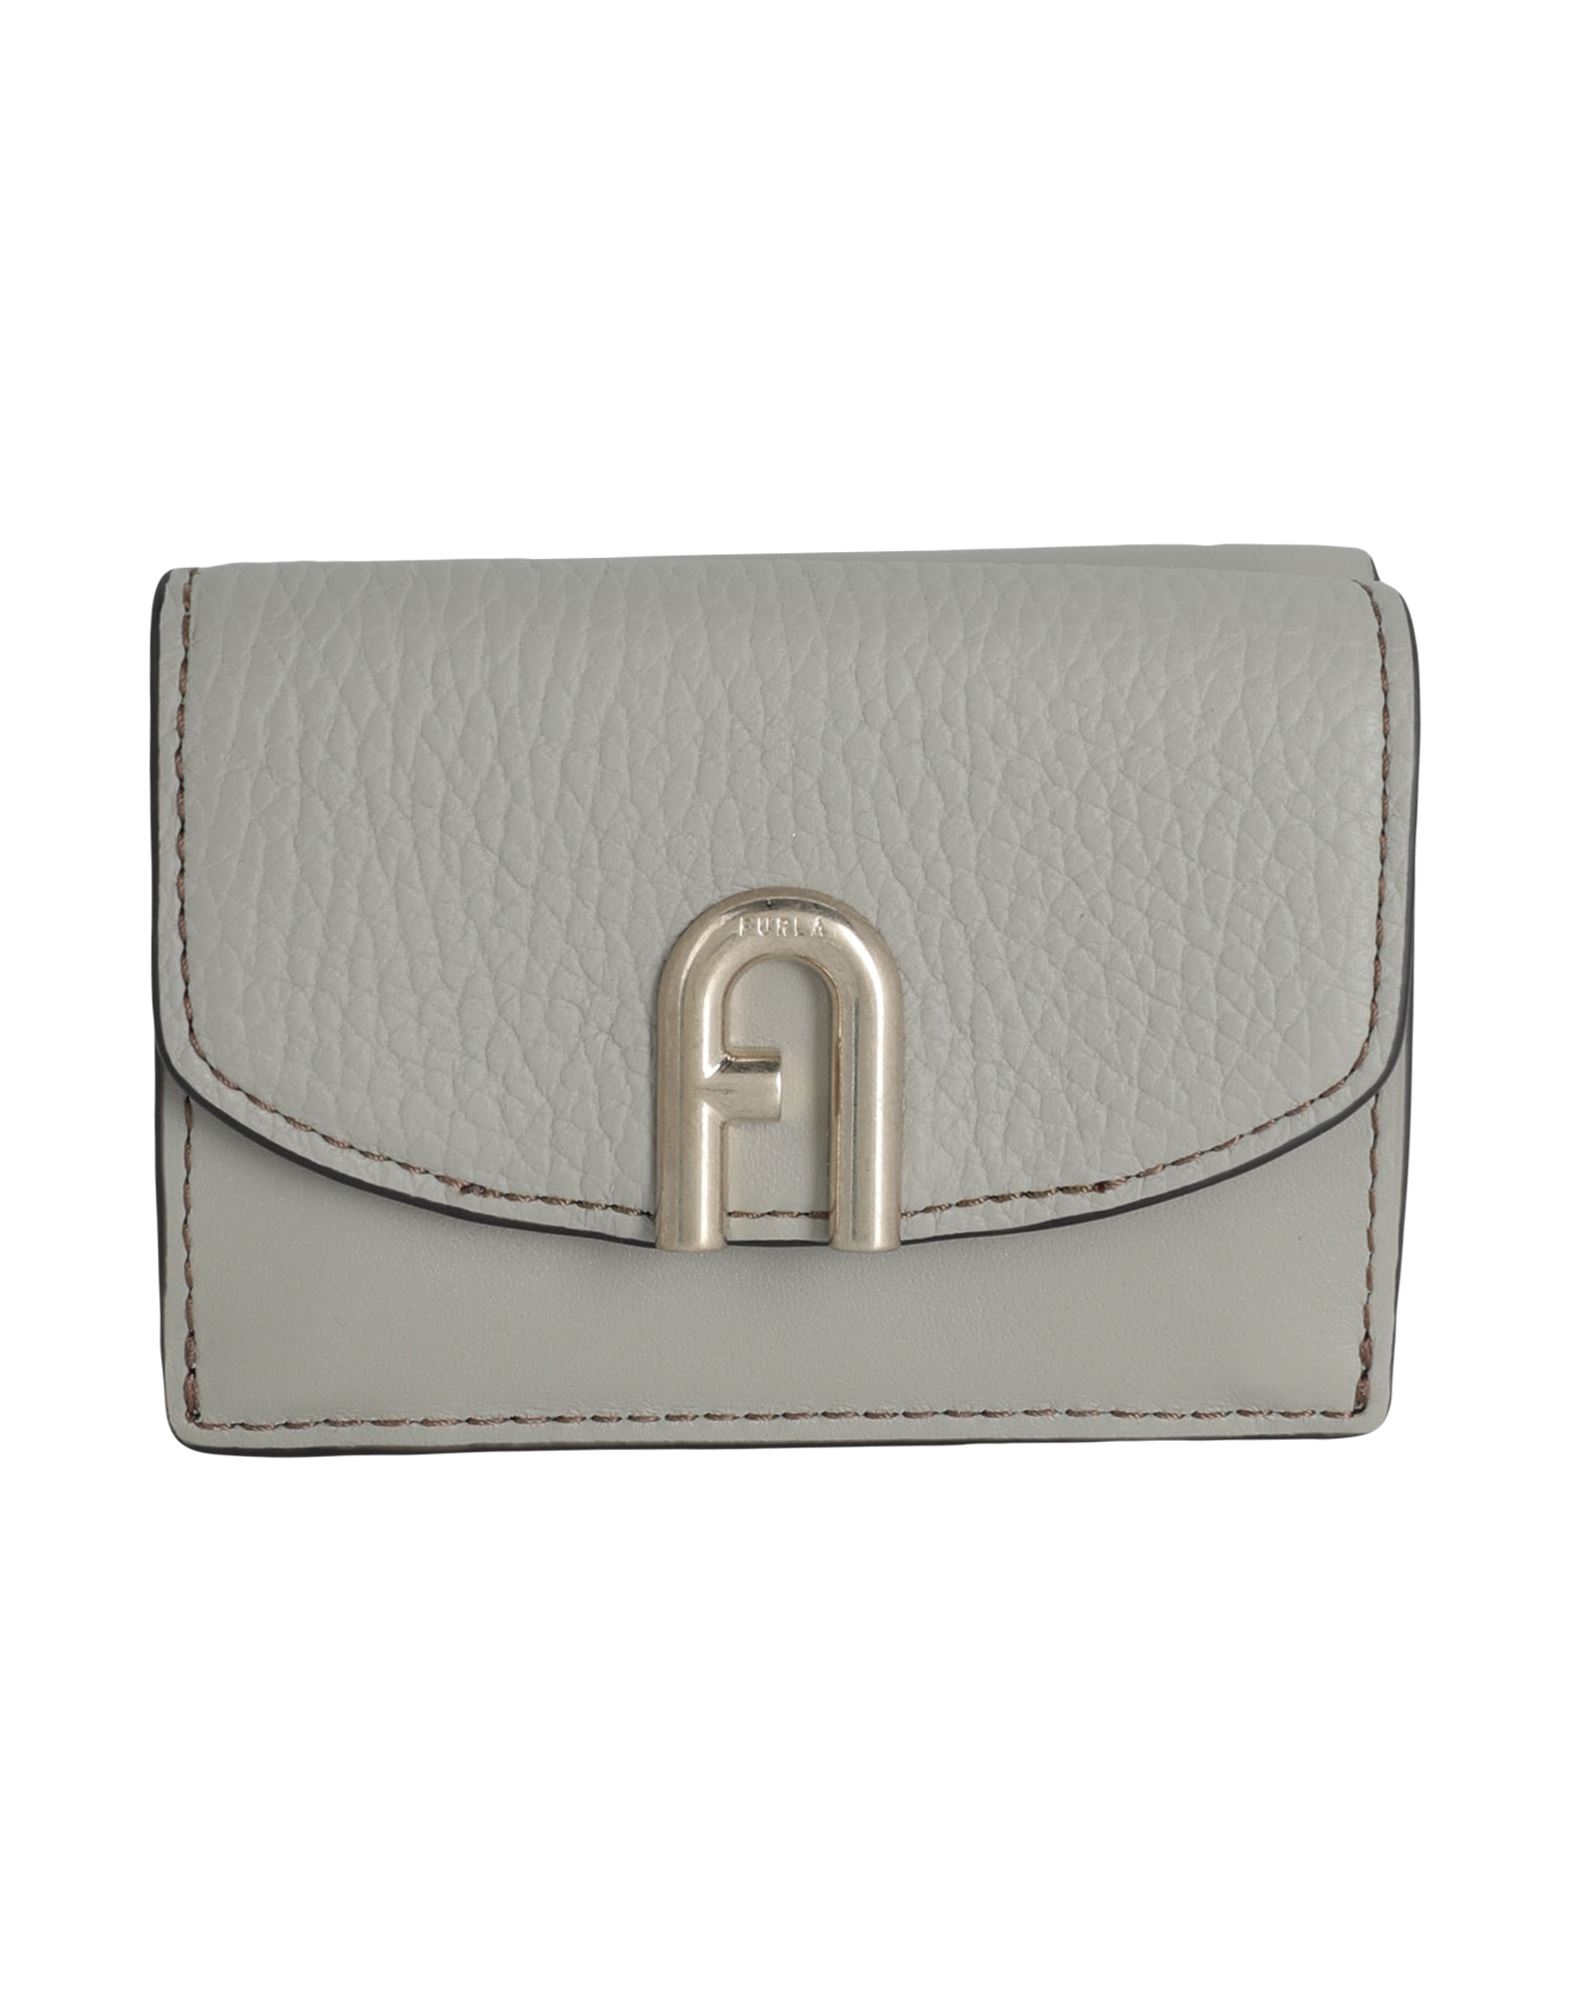 ԥ볫FURLA ǥ  ɡ֥졼 סʥա 100% FURLA PRIMULA S COMPACT WALLET